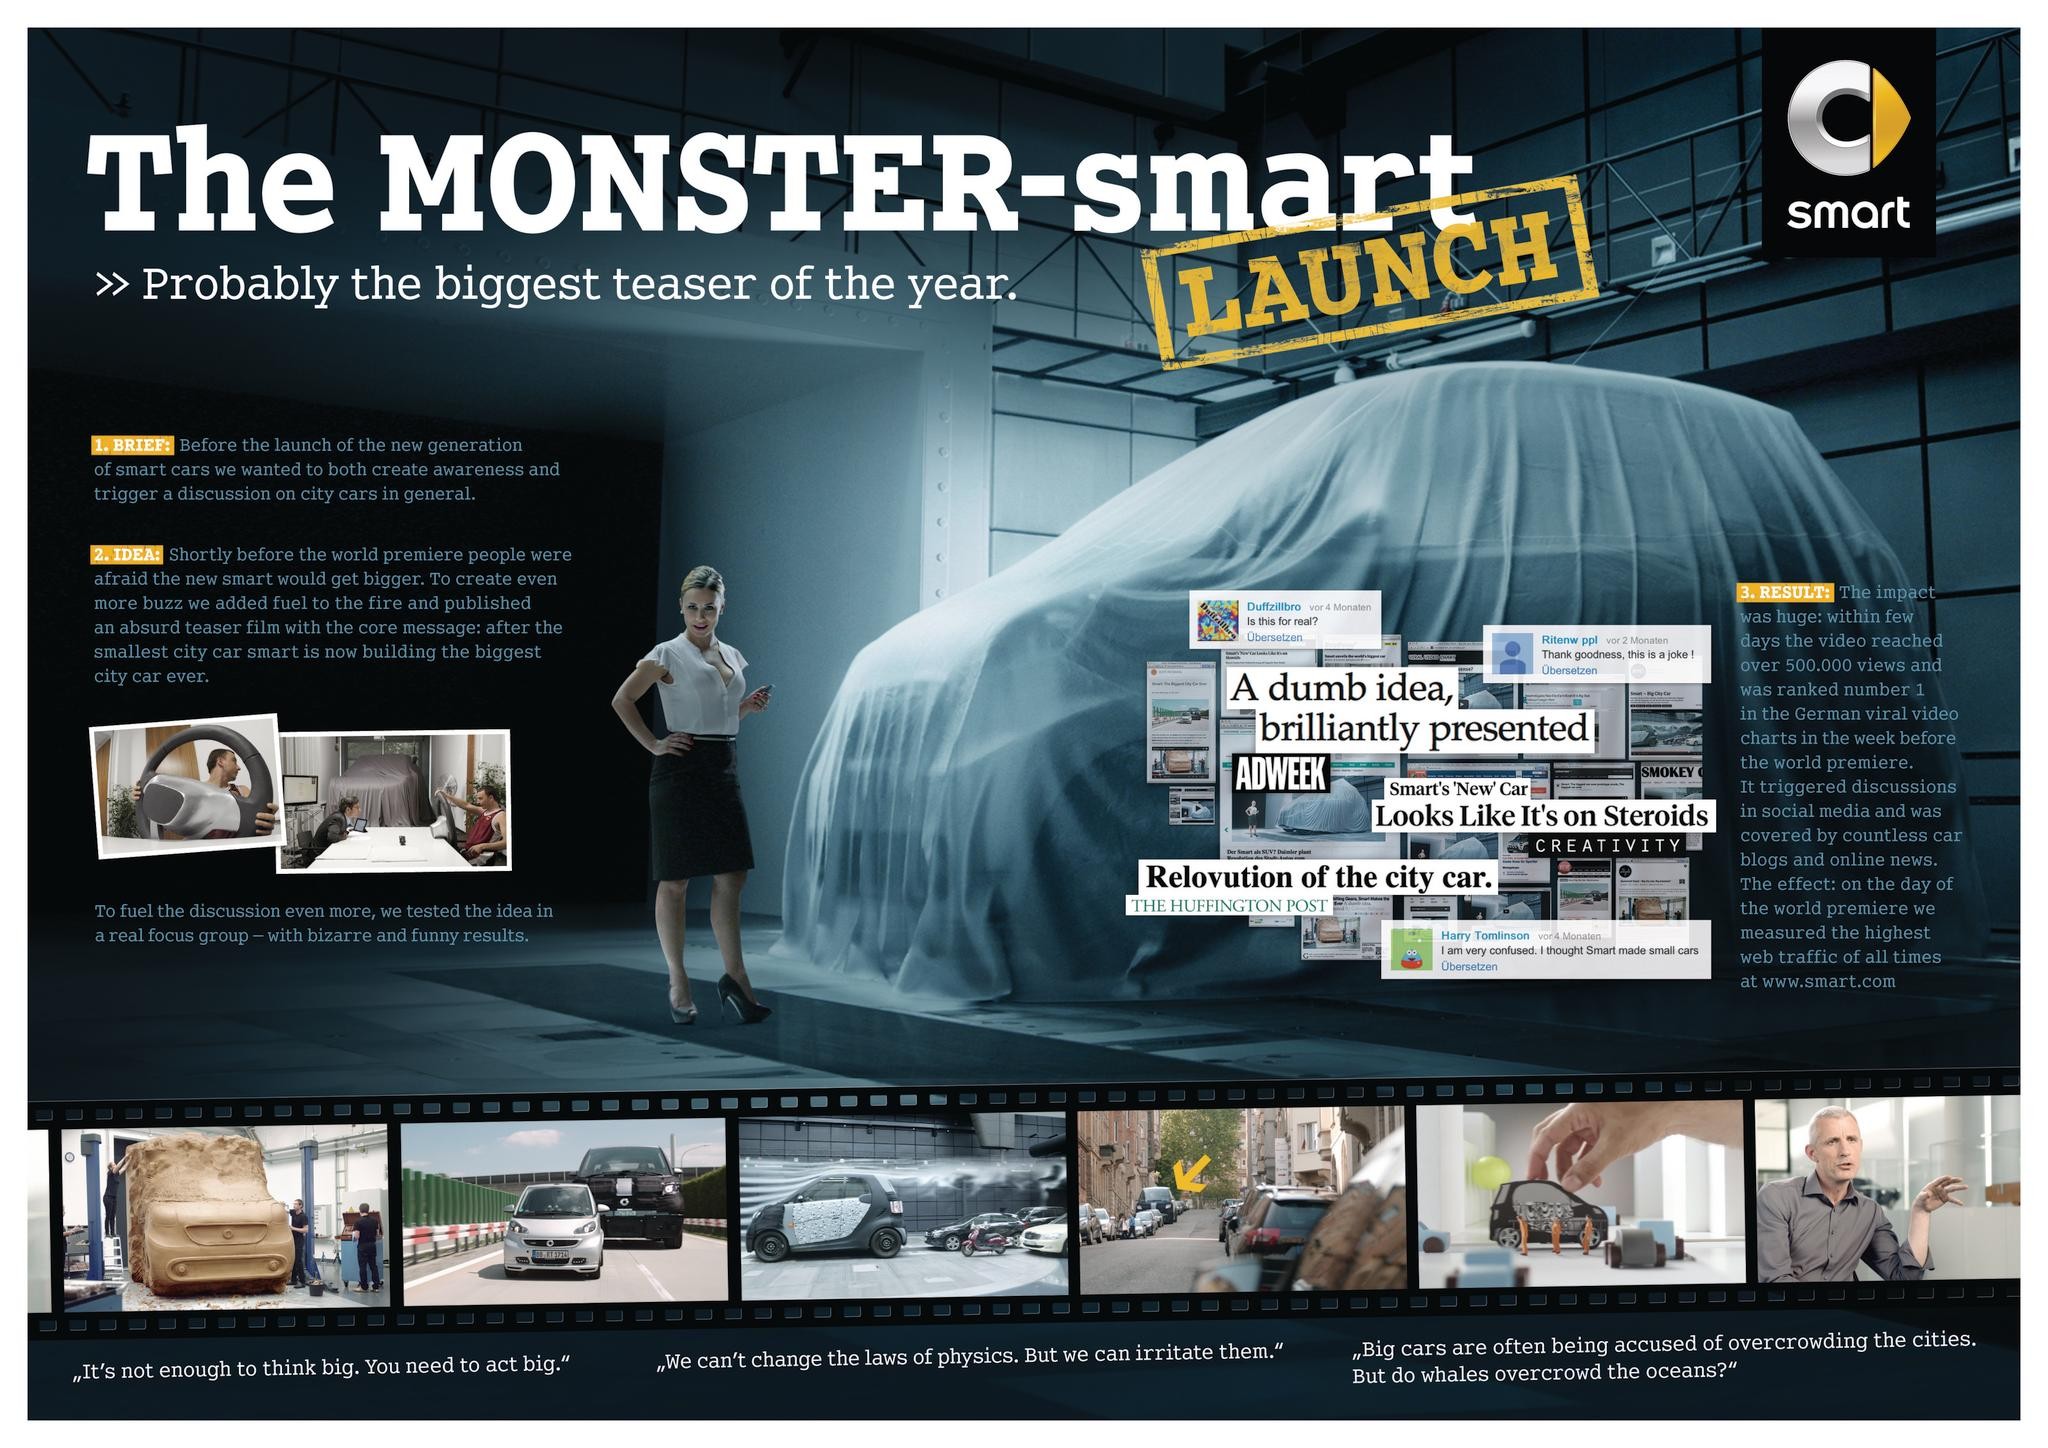 THE MONSTER-SMART LAUNCH